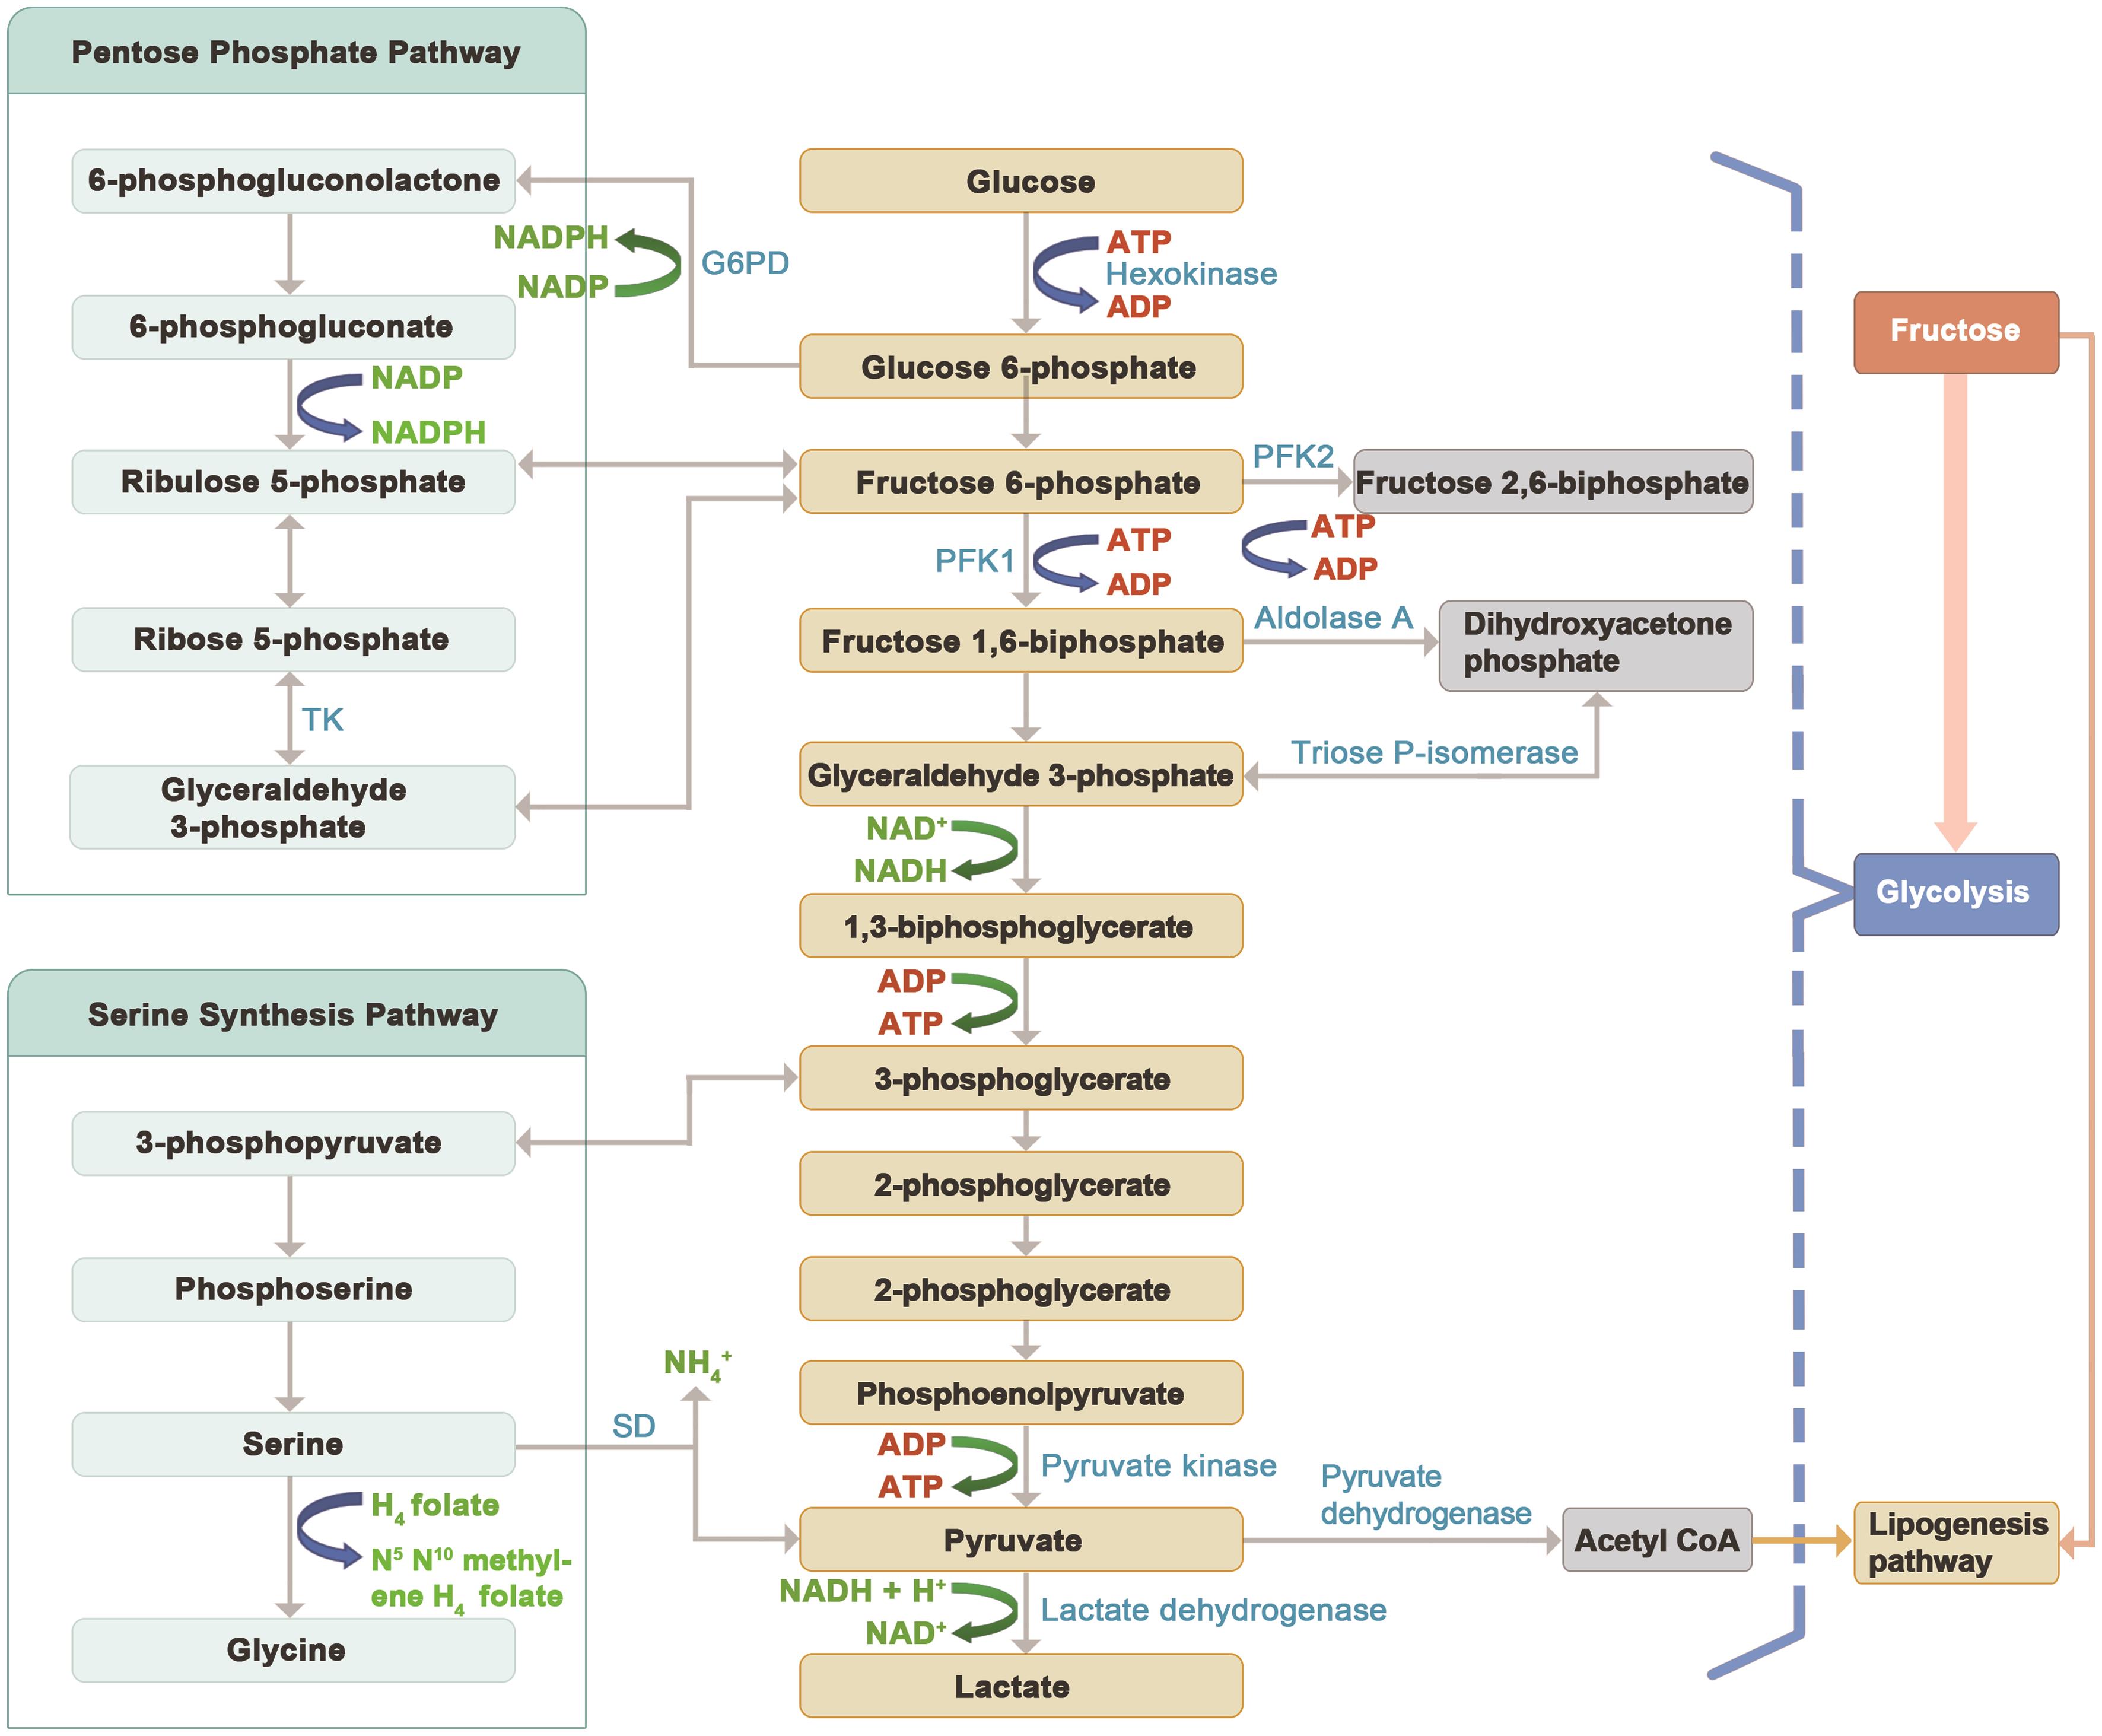 Fructose metabolism connected to glycolysis, the pentose phosphate pathway, and the serine synthesis pathway can provide the cellular constituents essential for malignant cells.